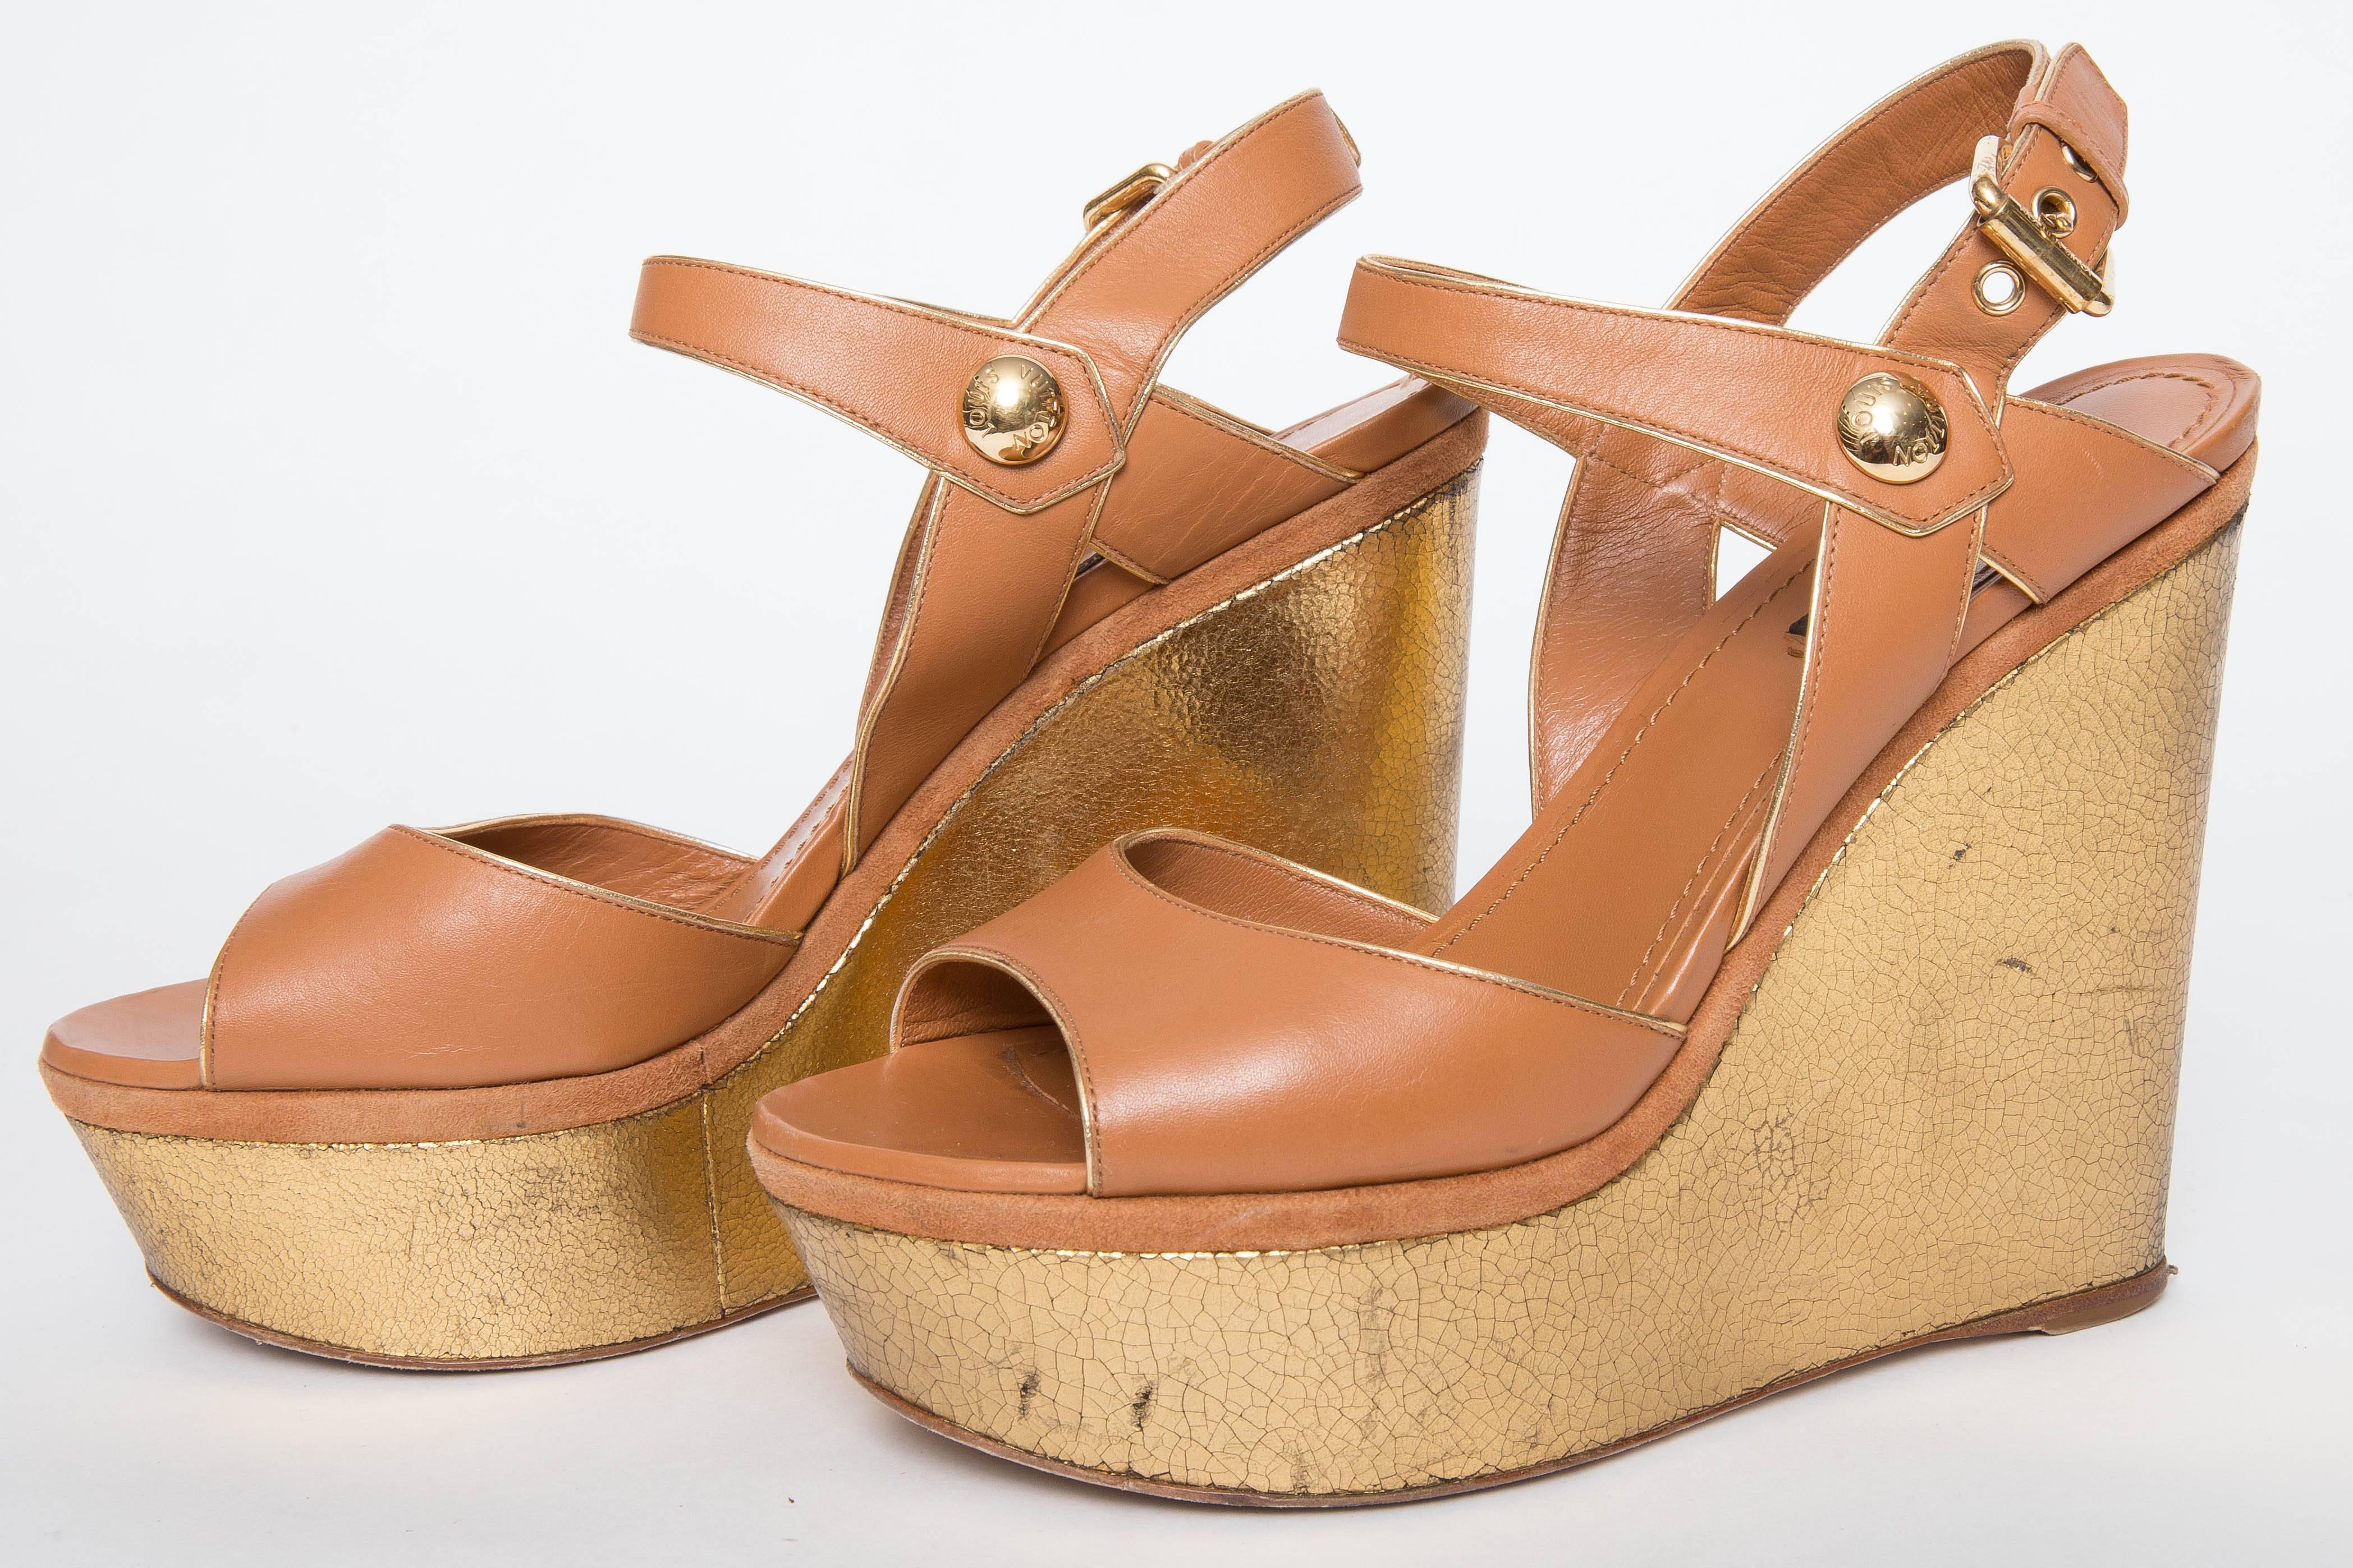 Louise Vuitton Cruise 2013 Liner Sandal In Good Condition In Westhampton Beach, NY